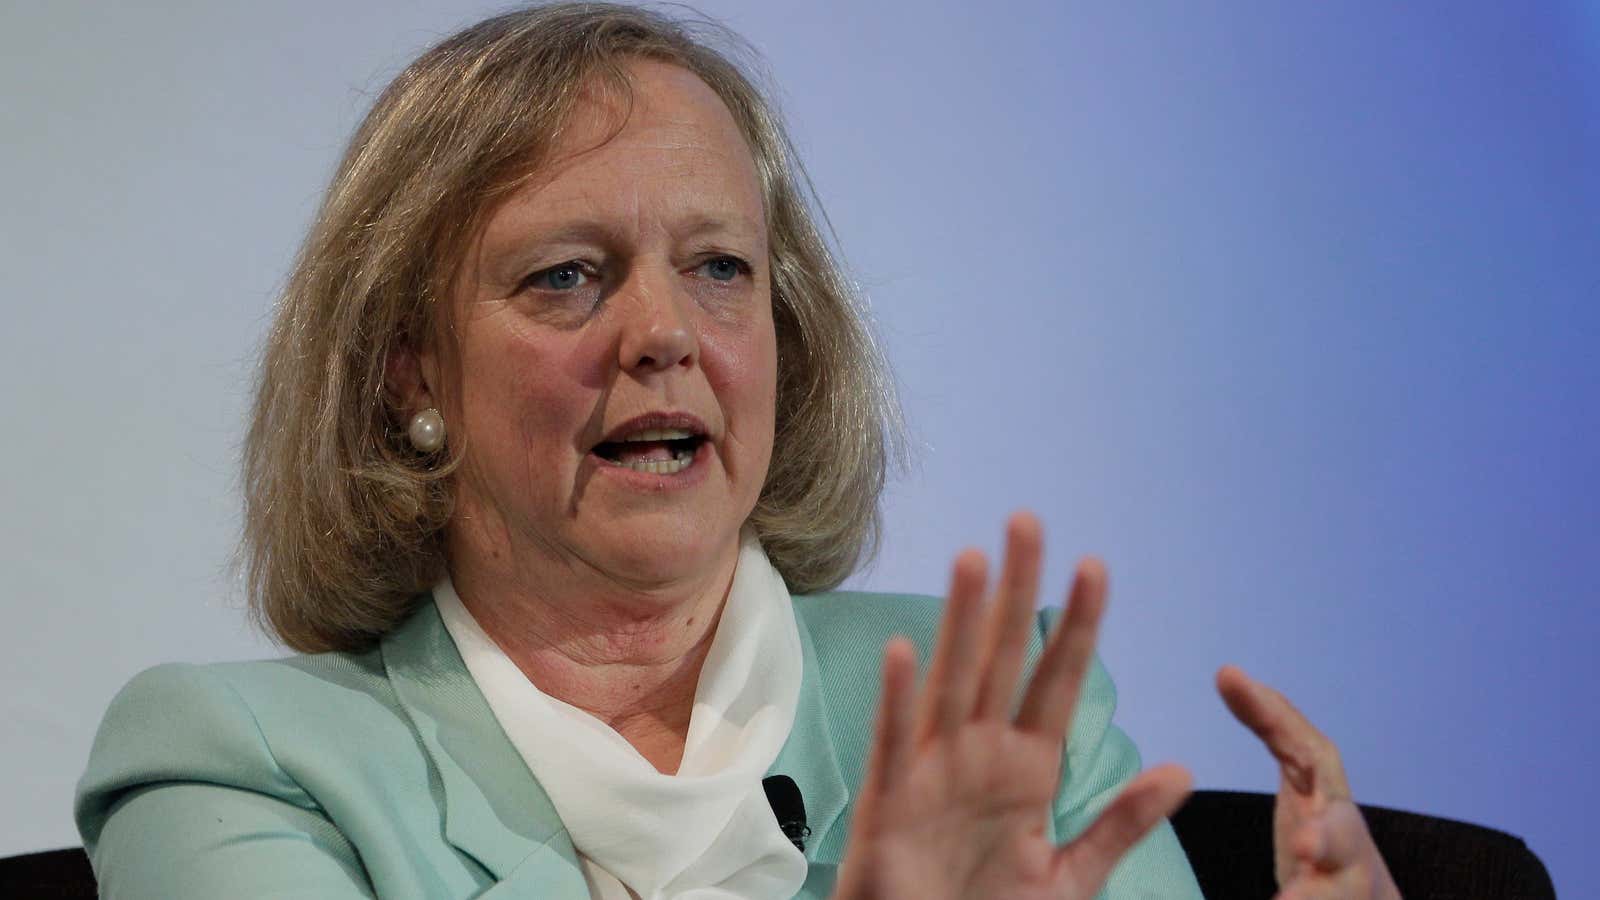 Whitman has to convince investors bleeding has stopped at HP